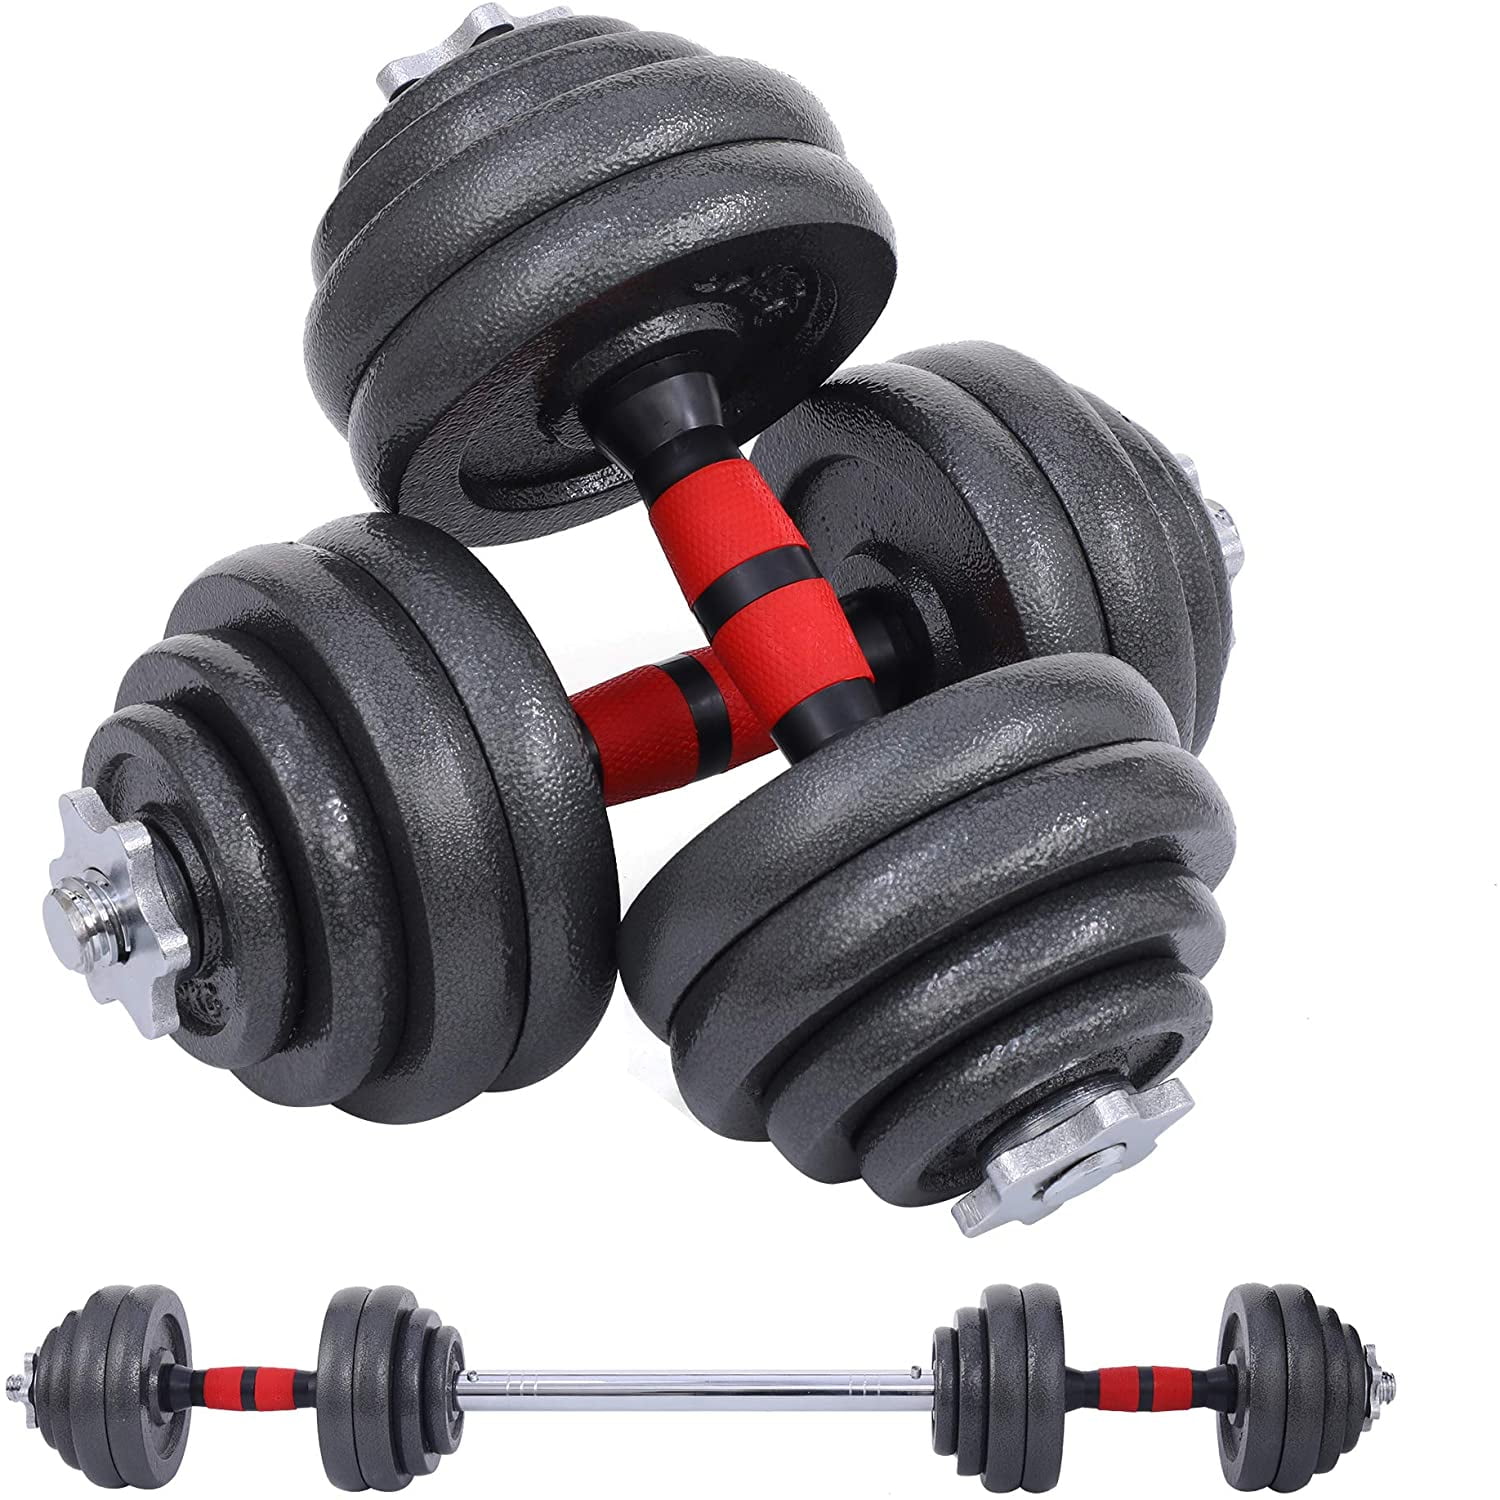 110 LBS Adjustable Full Steel Dumbbell Weight Set For Gym Home Body Workout 